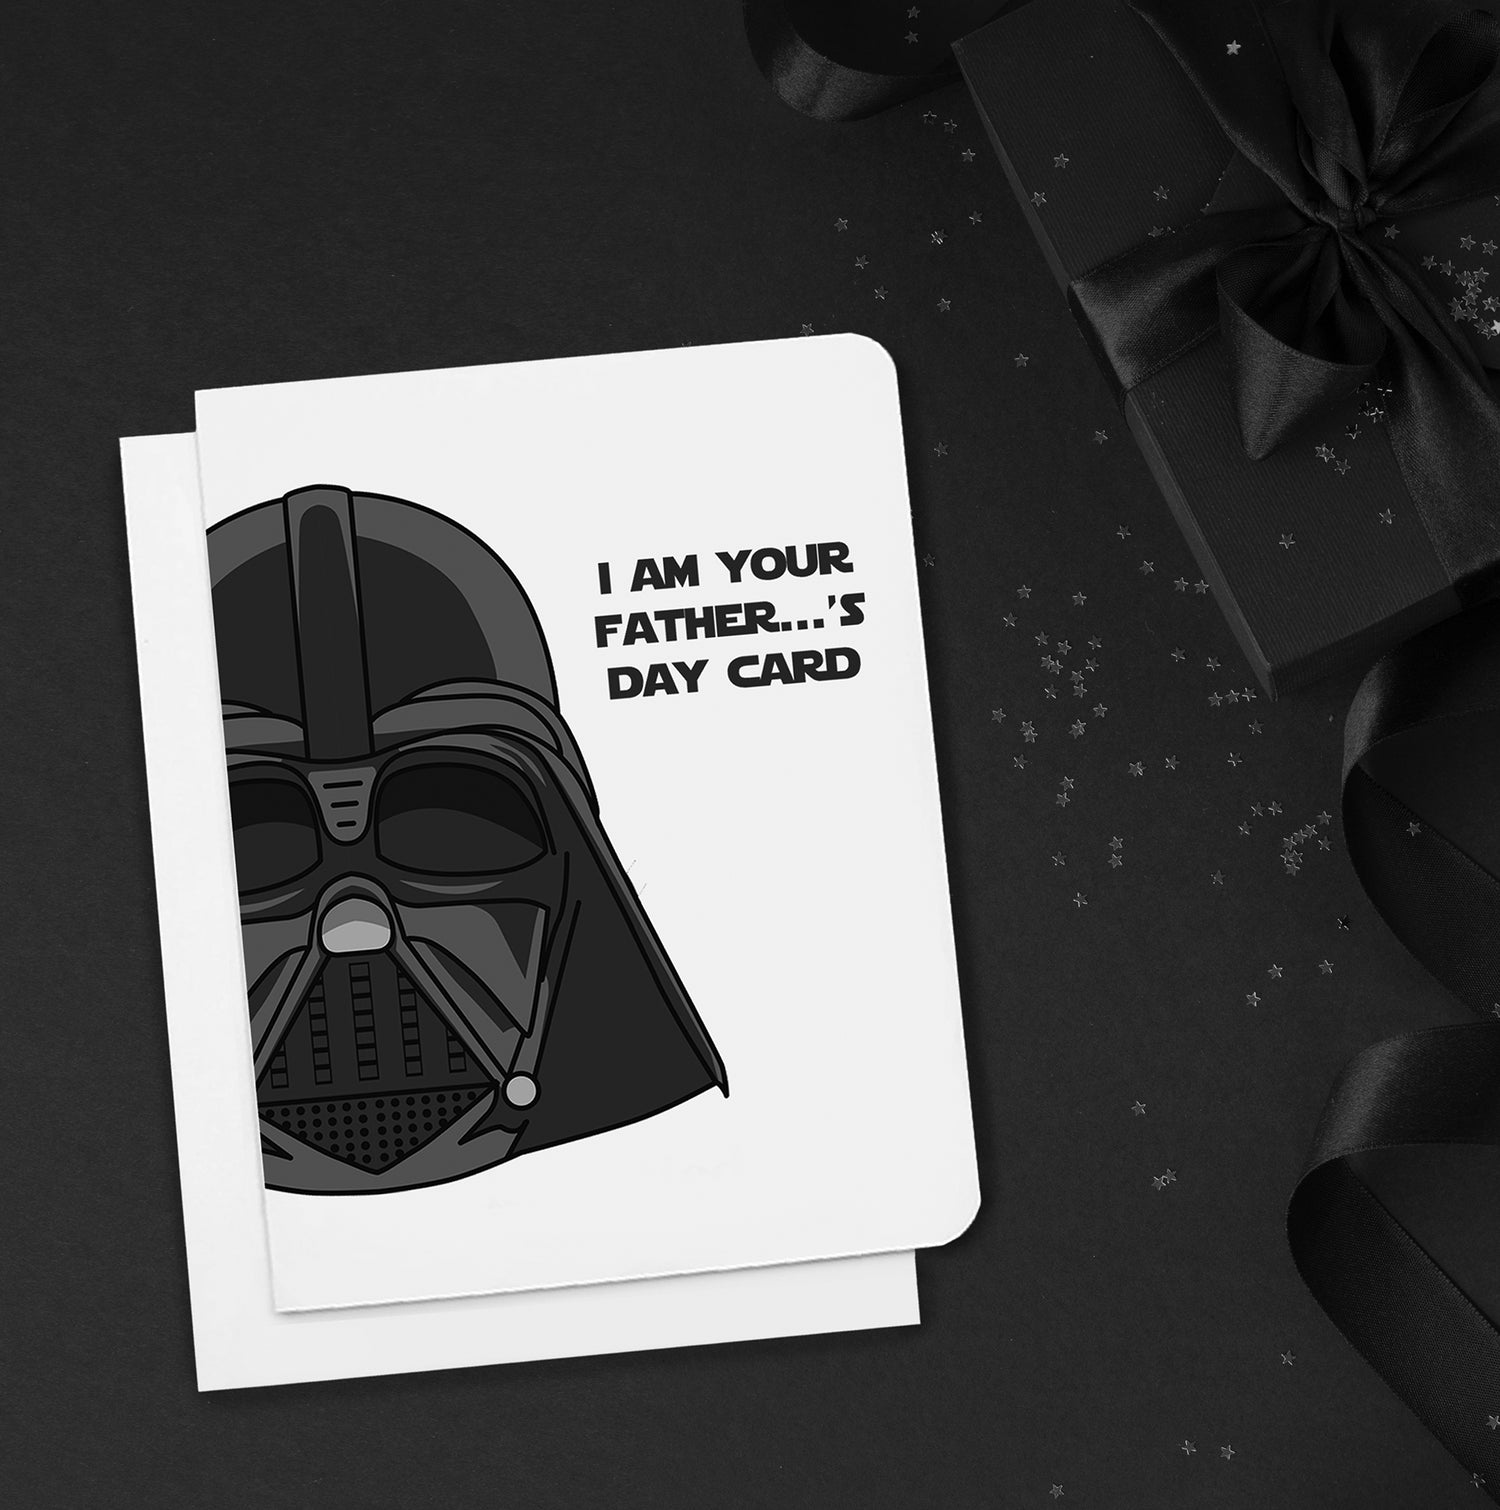 A fathers day card. It has Darth Vader on it. Text reads 'I am your Father ...'s Day Card.